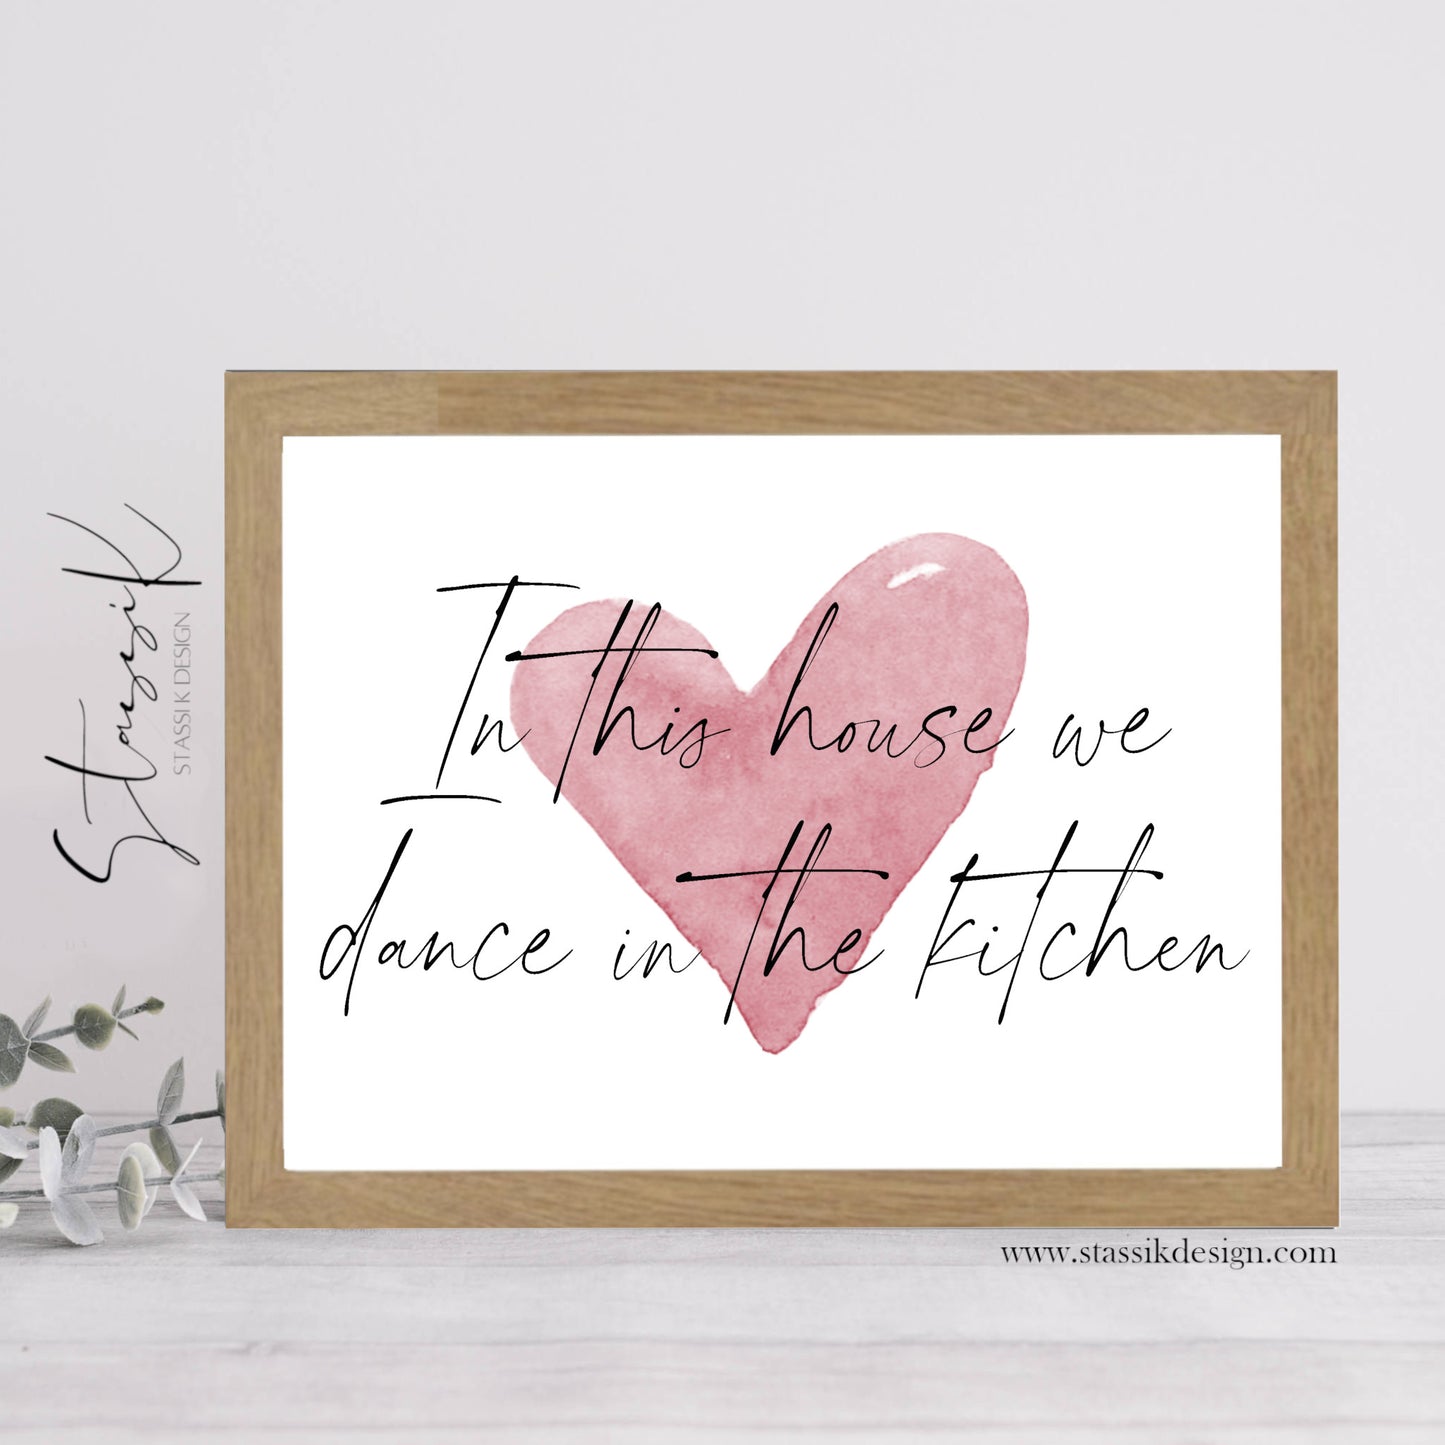 Kitchen Print - 'In this house we dance in the kitchen'